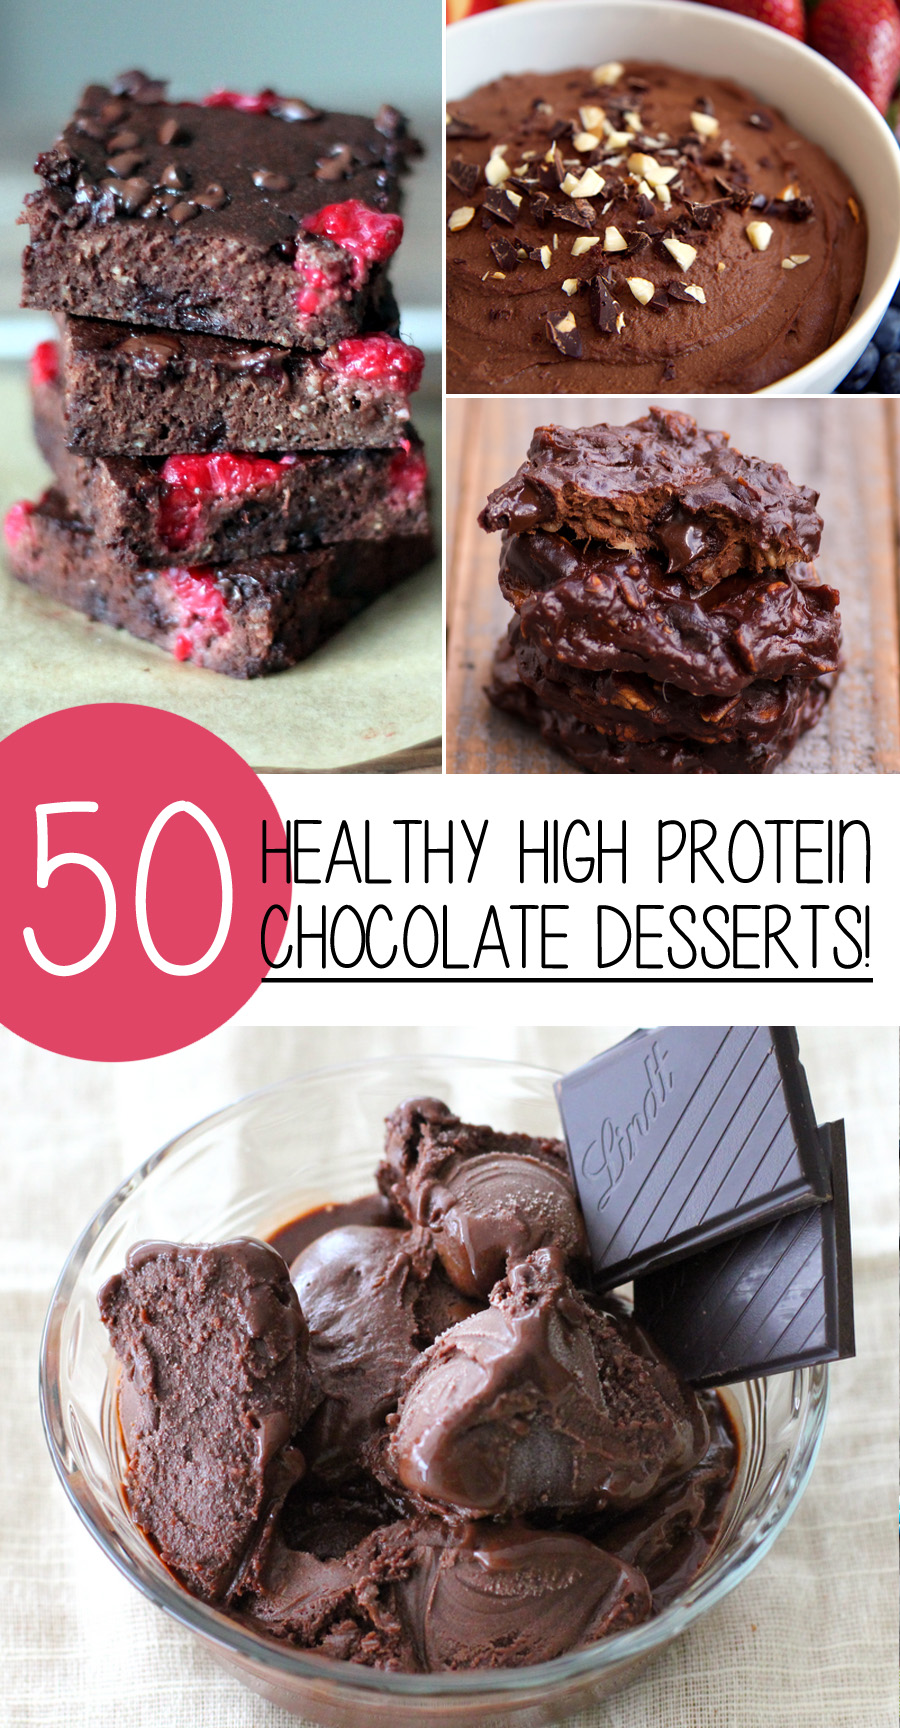 Indulge guilt-free with these delectable high-protein desserts!